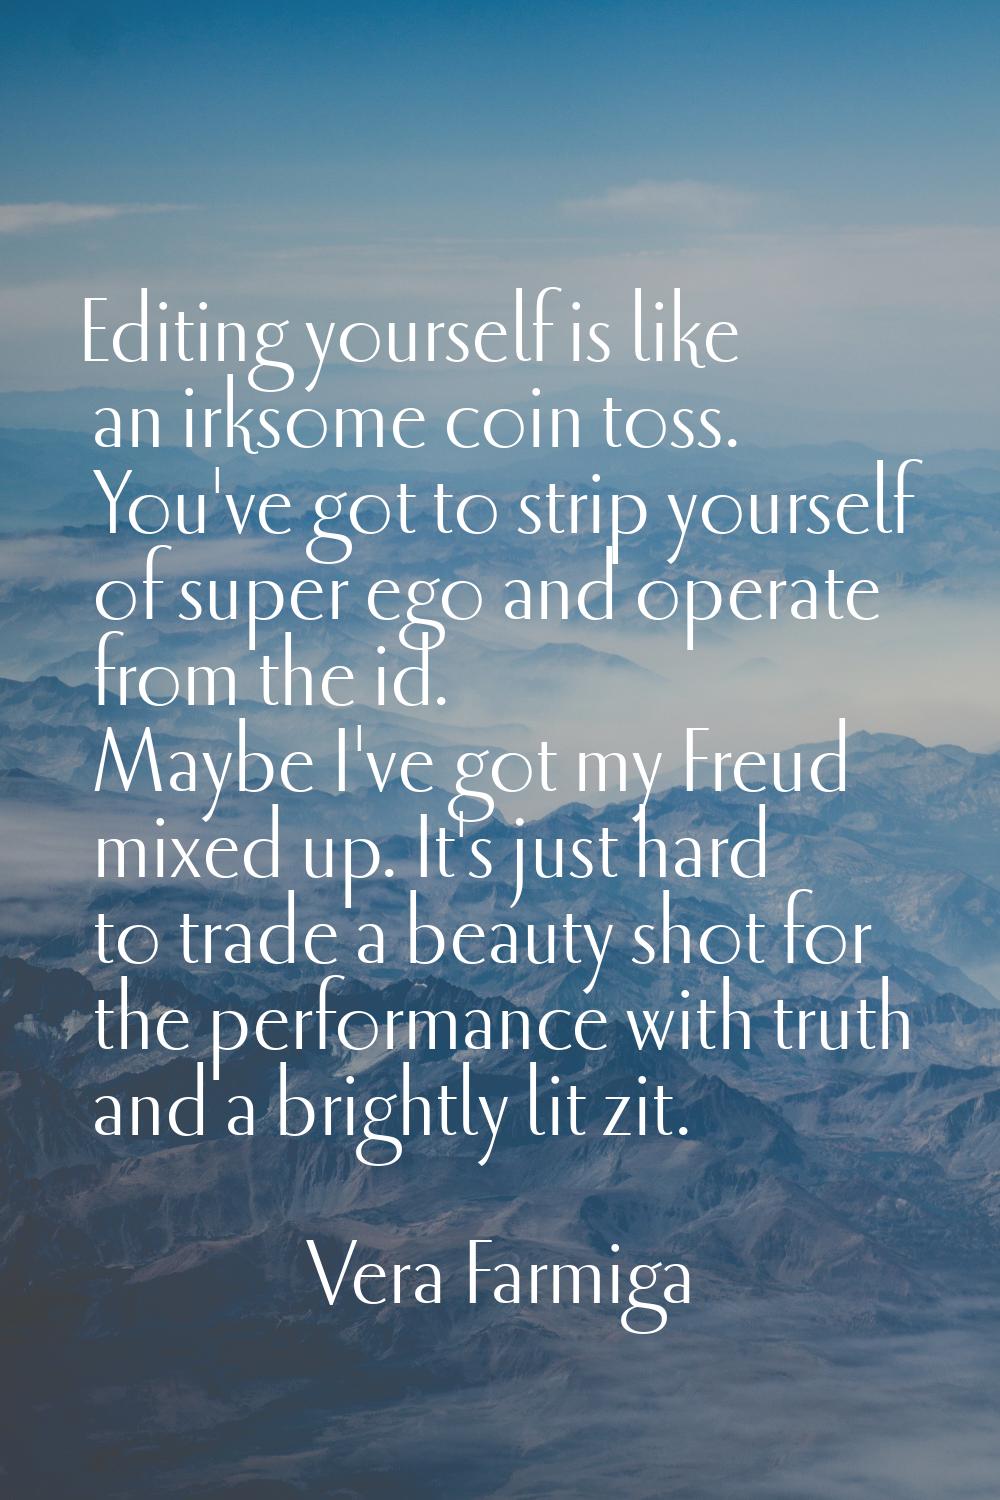 Editing yourself is like an irksome coin toss. You've got to strip yourself of super ego and operat